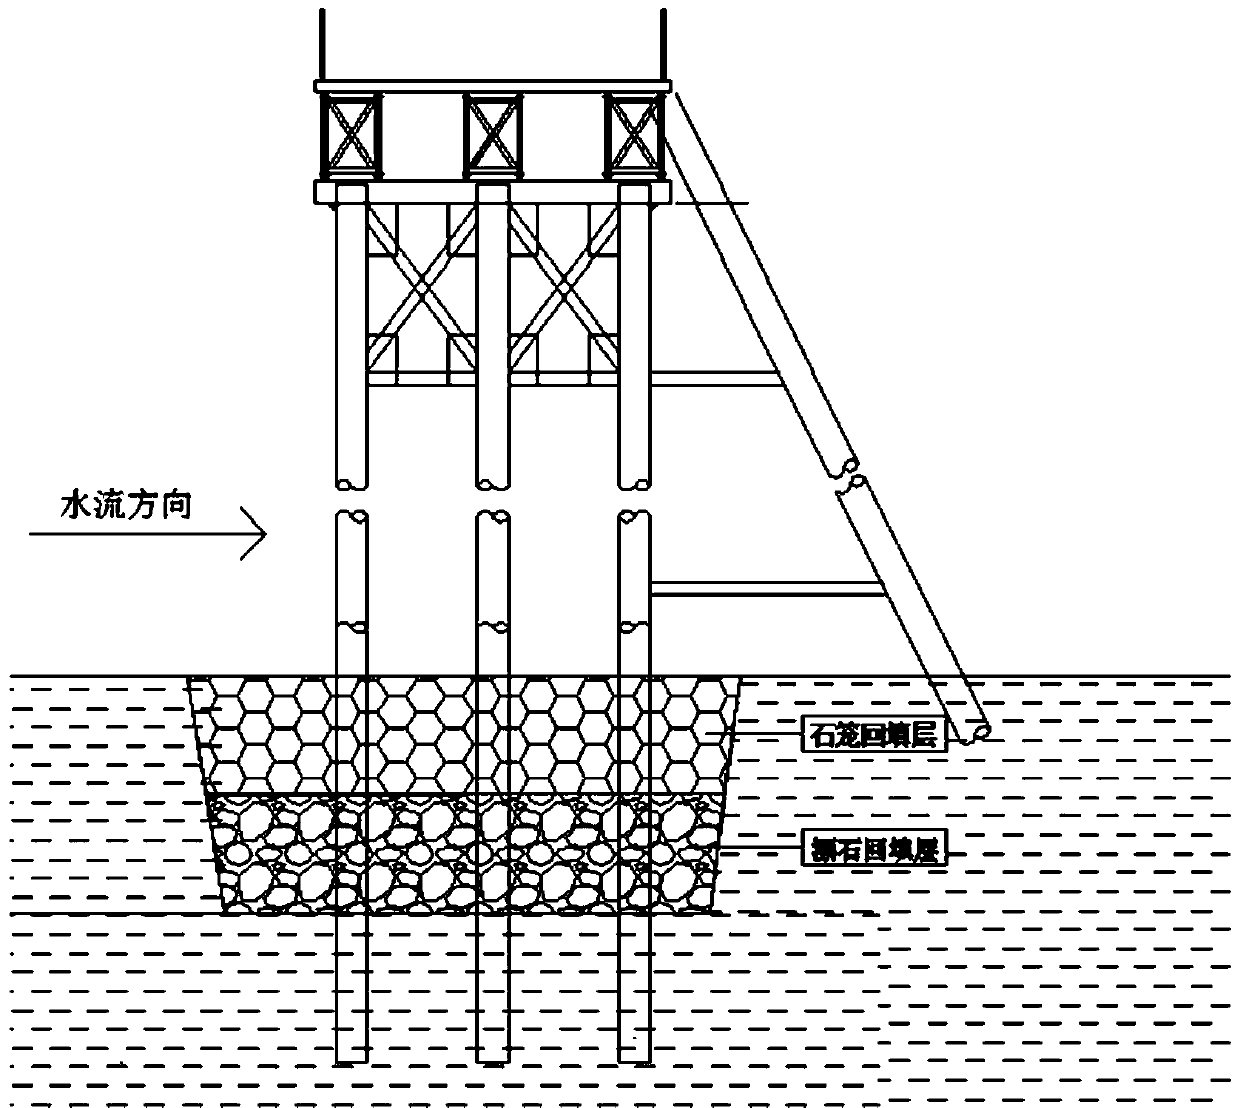 Anti-scouring construction method adopting steel trestle steel pipe piles on shallow water riverbed thick boulder covering layer